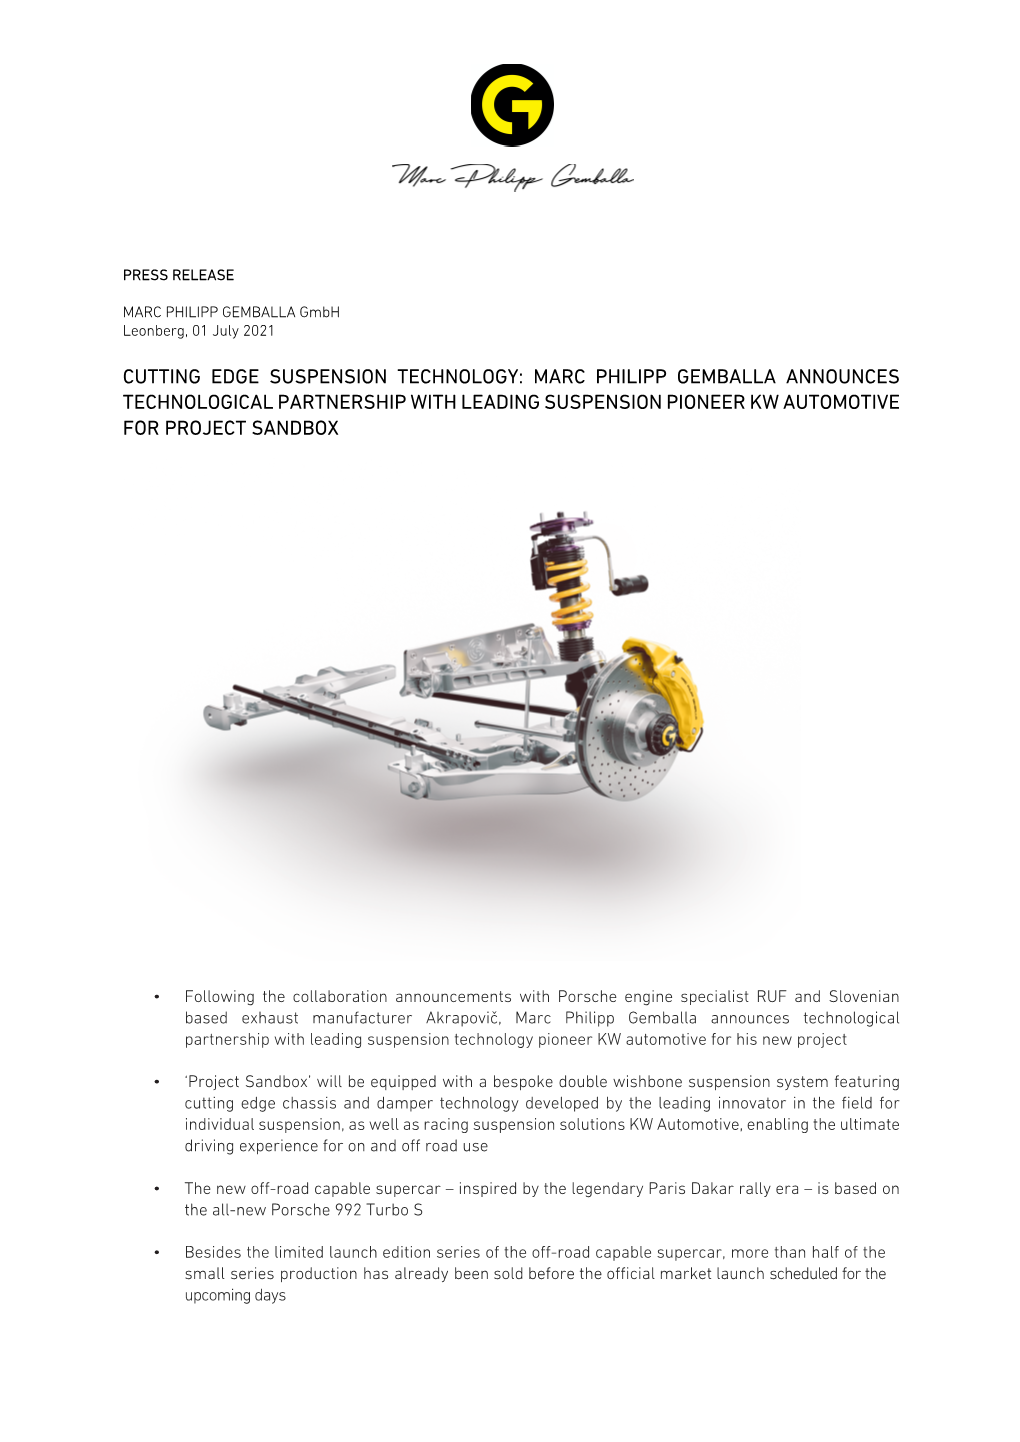 Cutting Edge Suspension Technology: Marc Philipp Gemballa Announces Technological Partnership with Leading Suspension Pioneer Kw Automotive for Project Sandbox